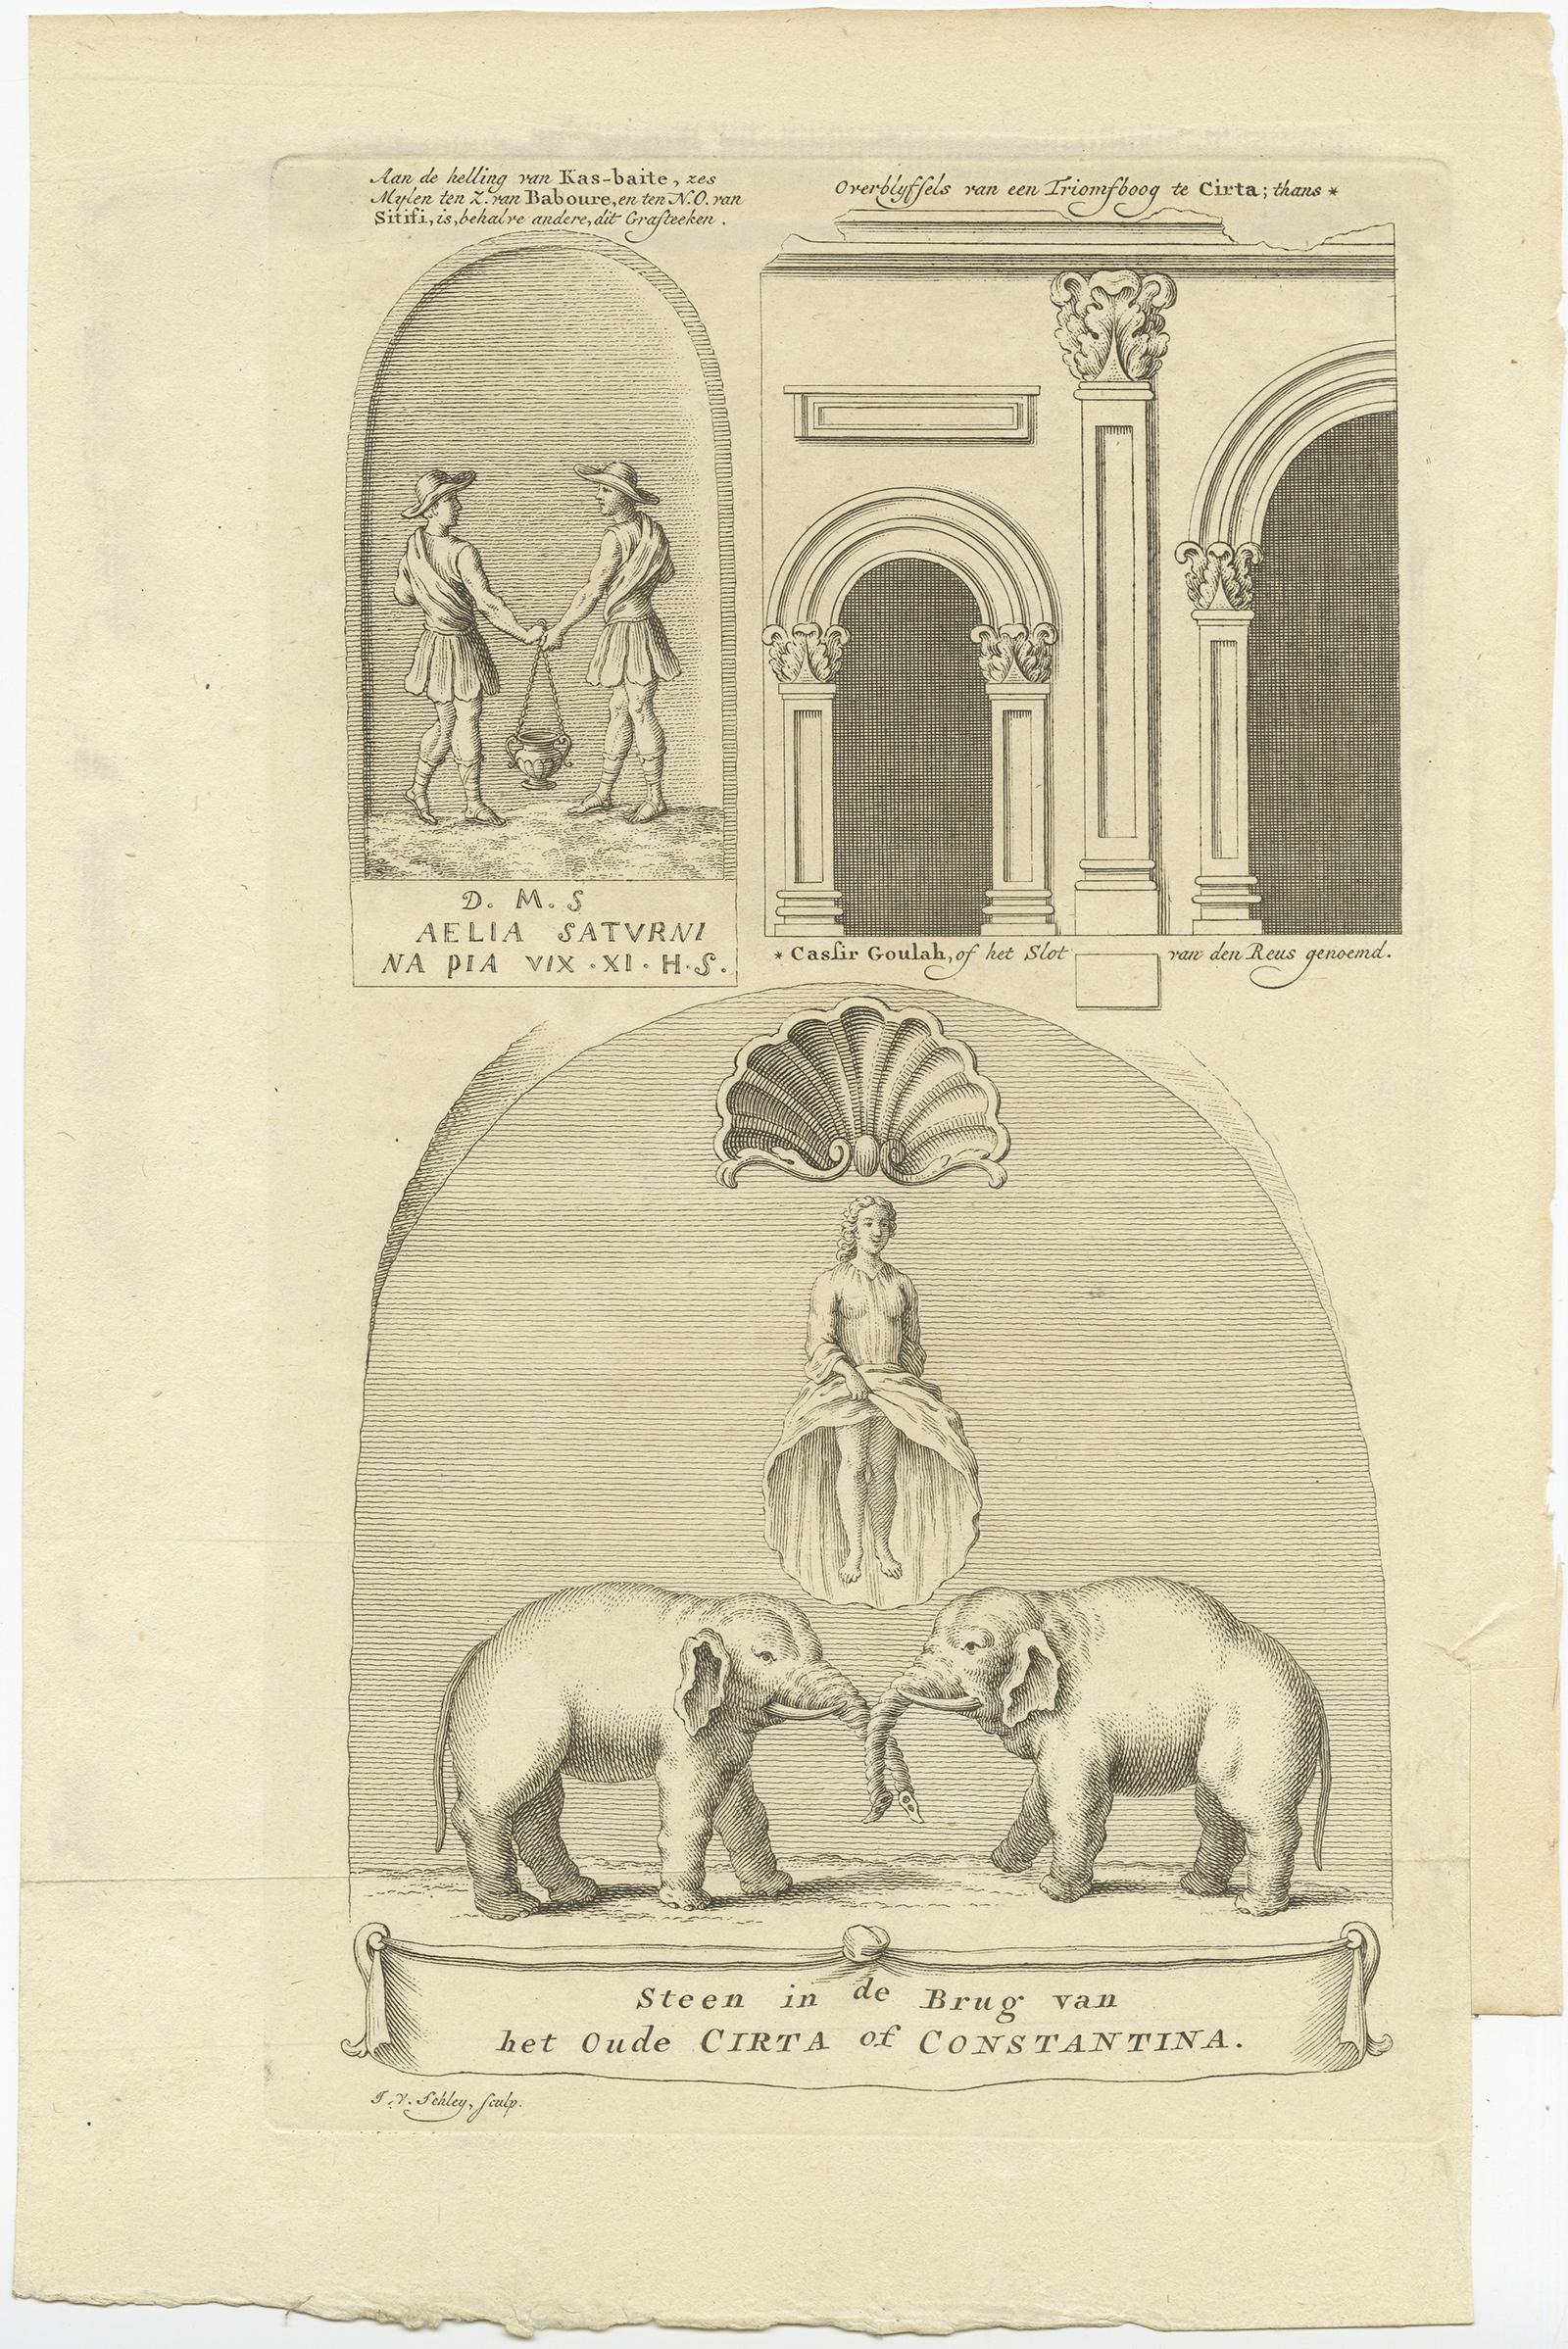 Antique print titled 'Steen in de brug van het oude Cirta (..)'. 

Old print depicting a stone with elephants from the bridge of Cirta/Constantine. Also depicts other architectural elements of Cirta. Originates from the first Dutch editon of an